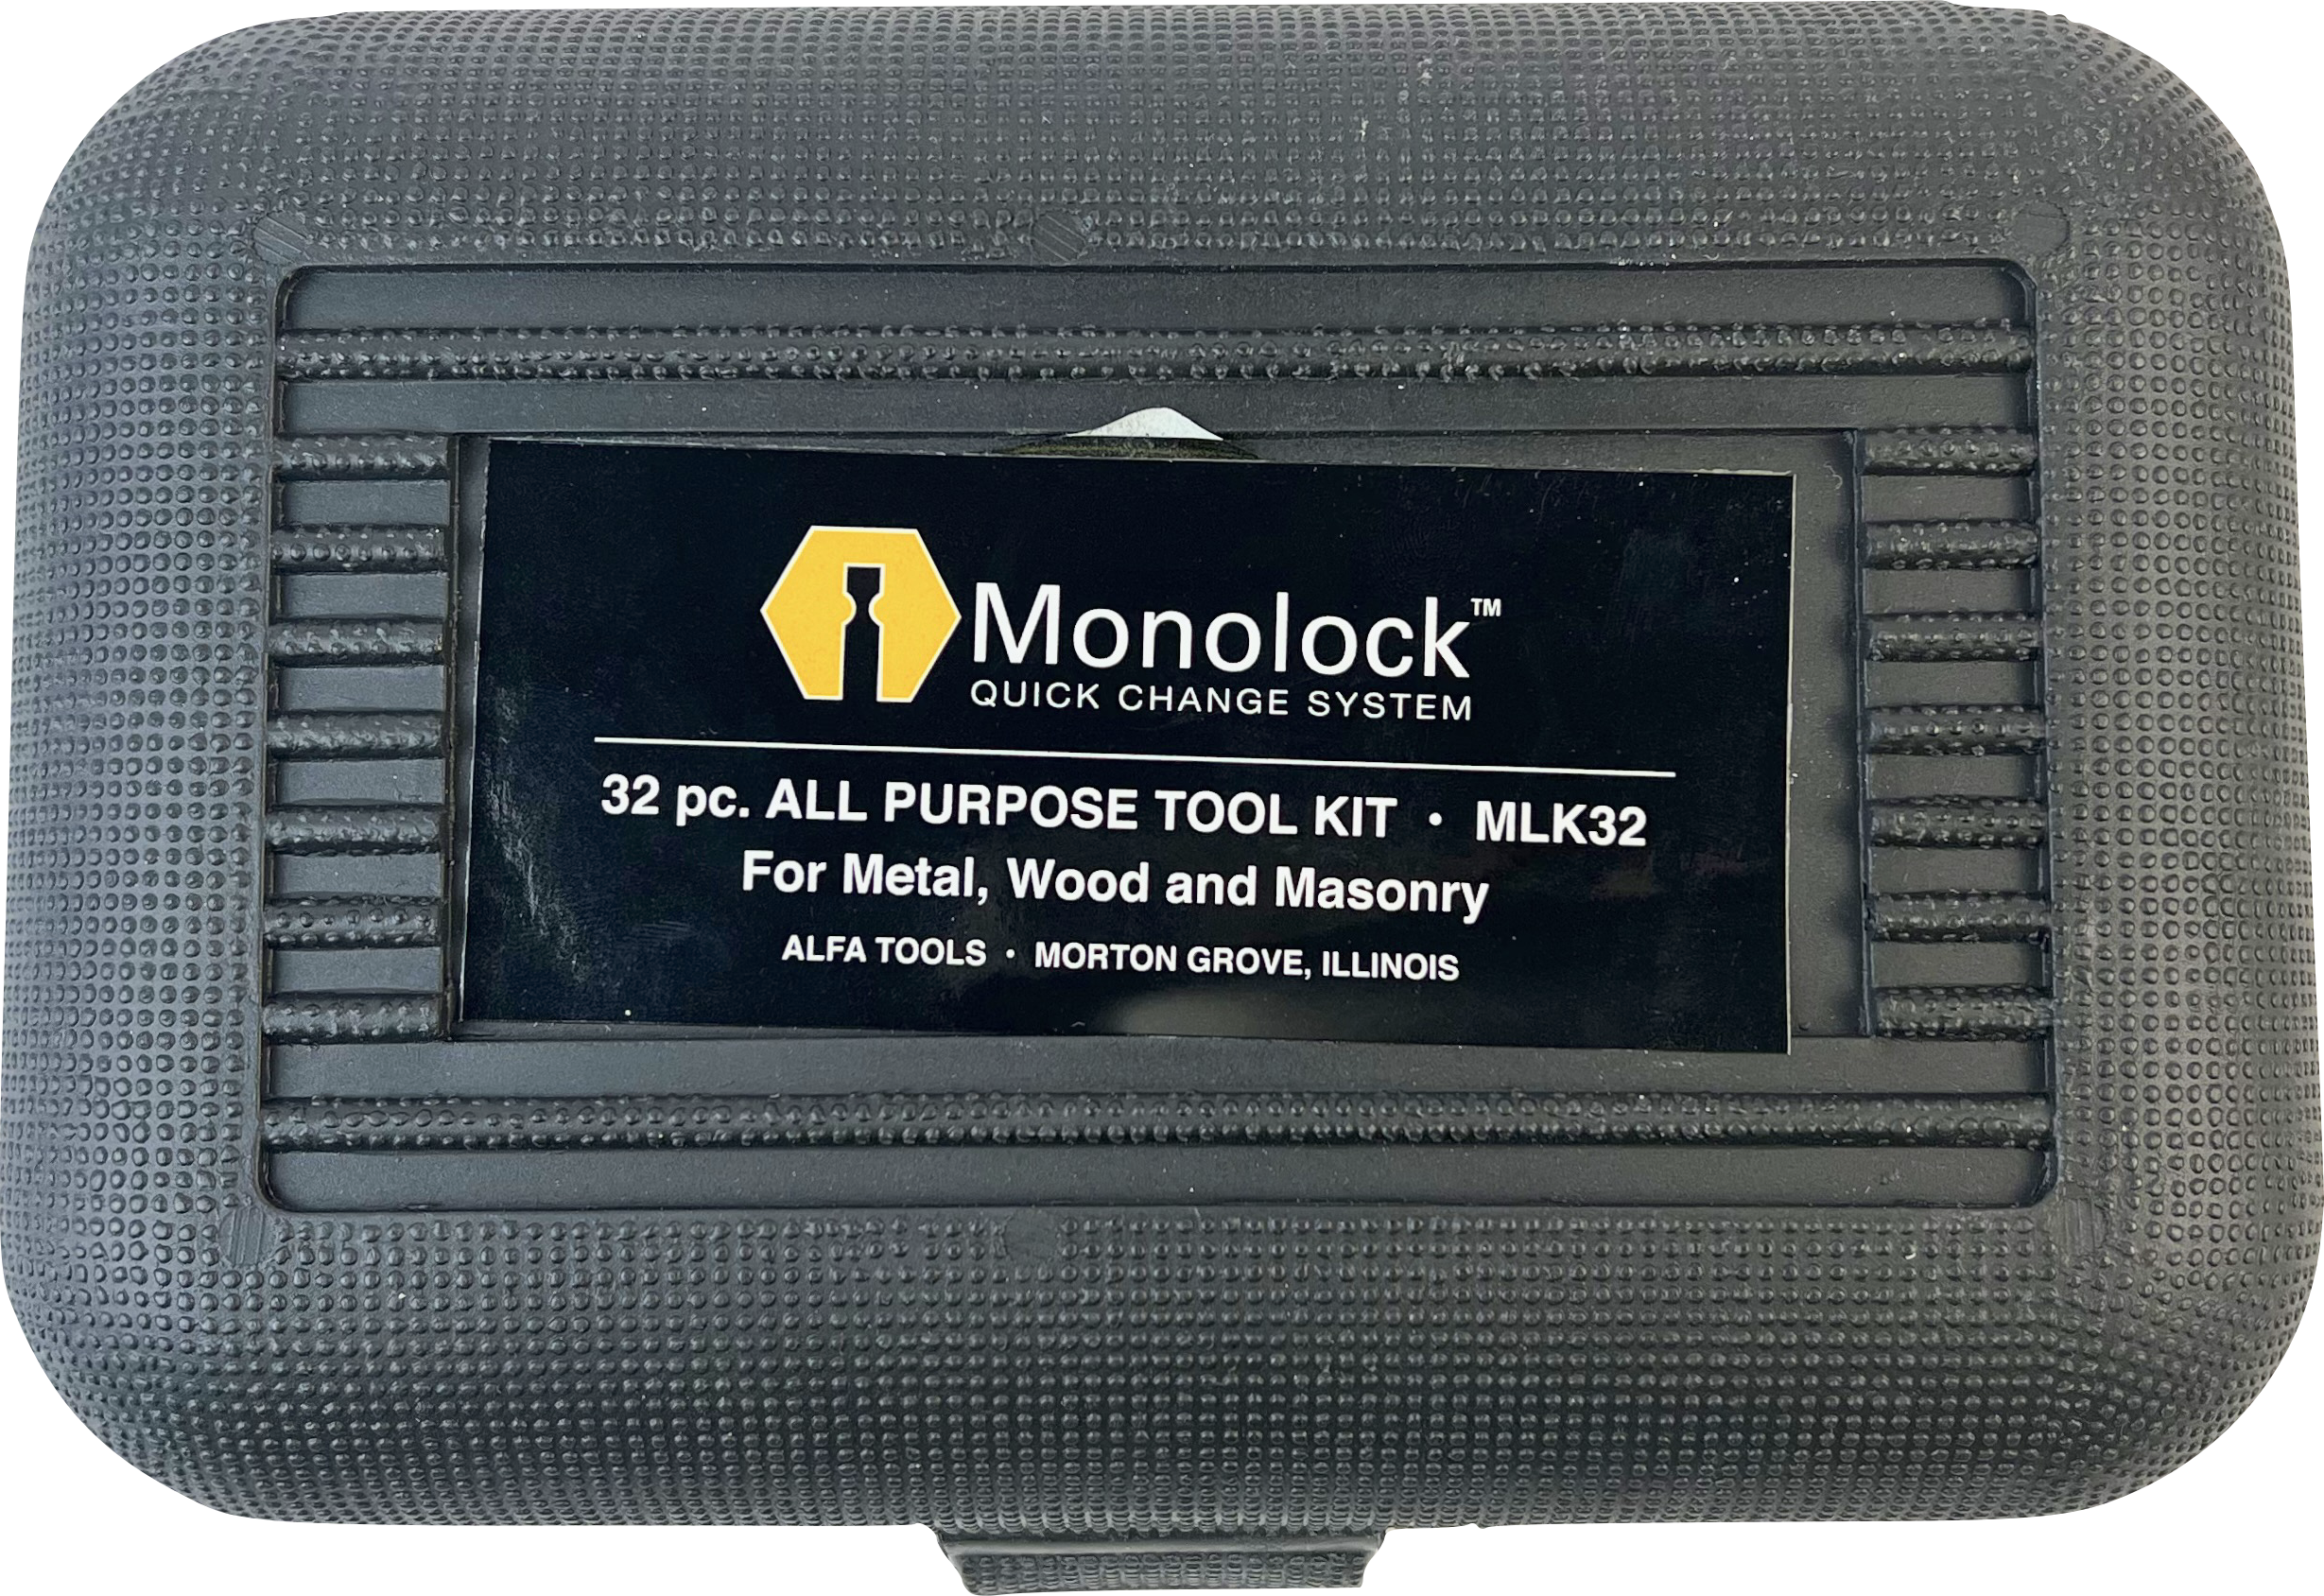 Alfa 32 Piece All Purpose Tool Kit for Metal, Wood and Masonry with Monolock Quick Change System (MLK32)